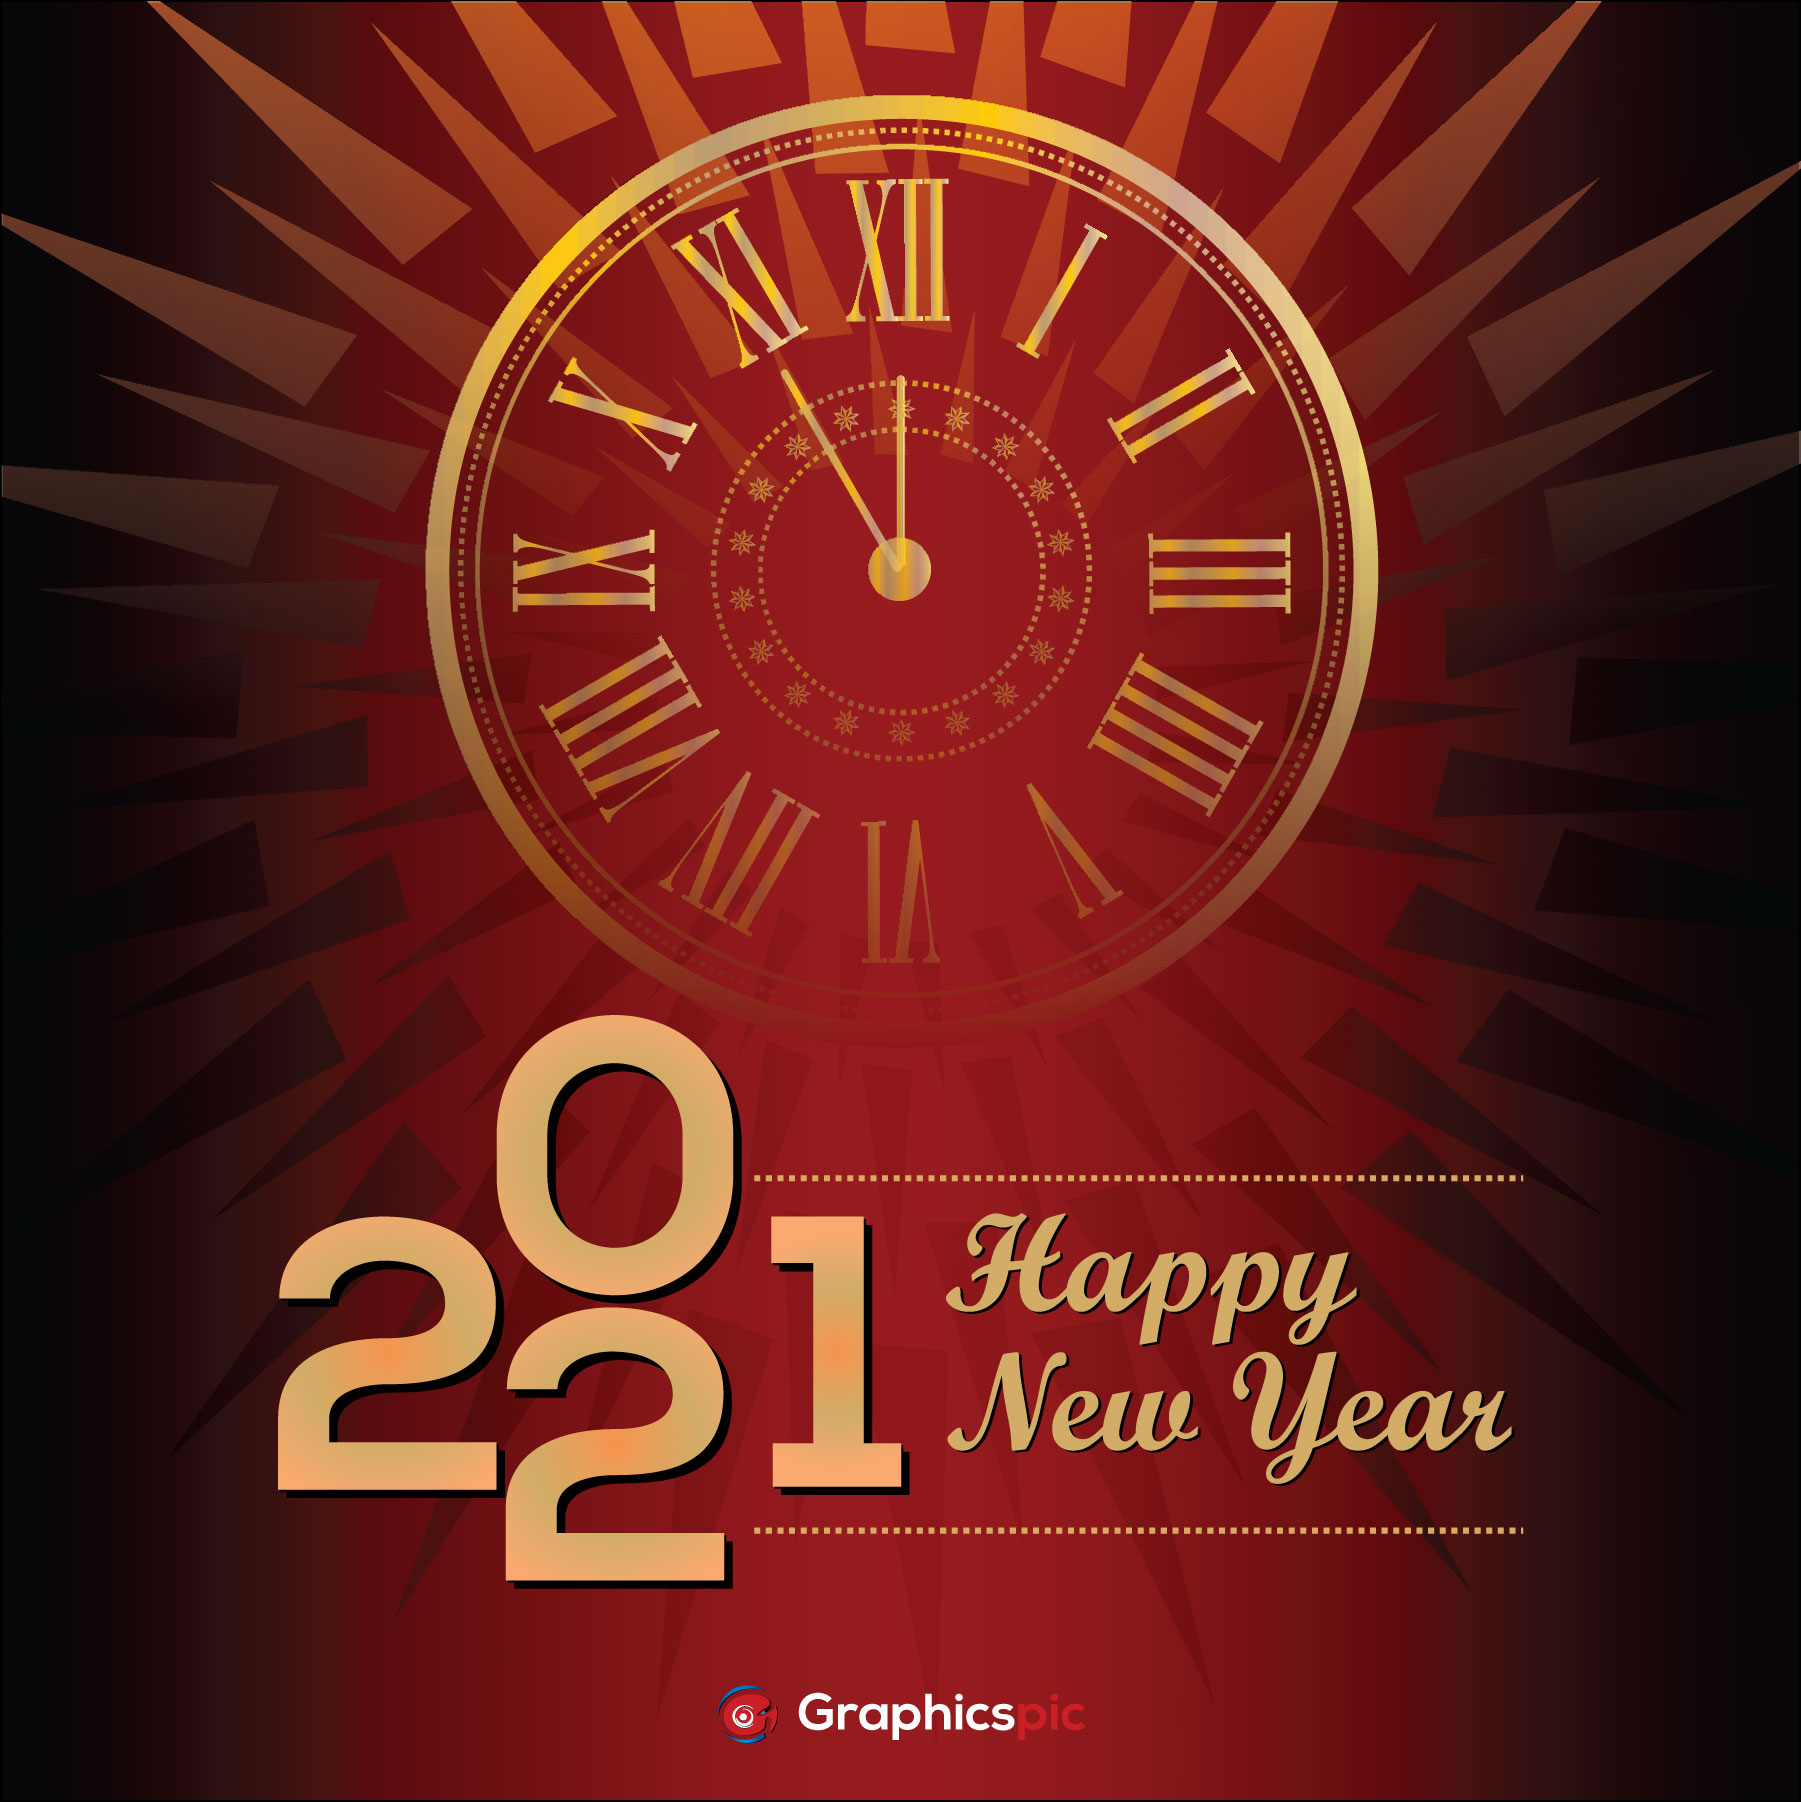 2021 happy new year with clock and clock background - Free Vector -  Graphics Pic